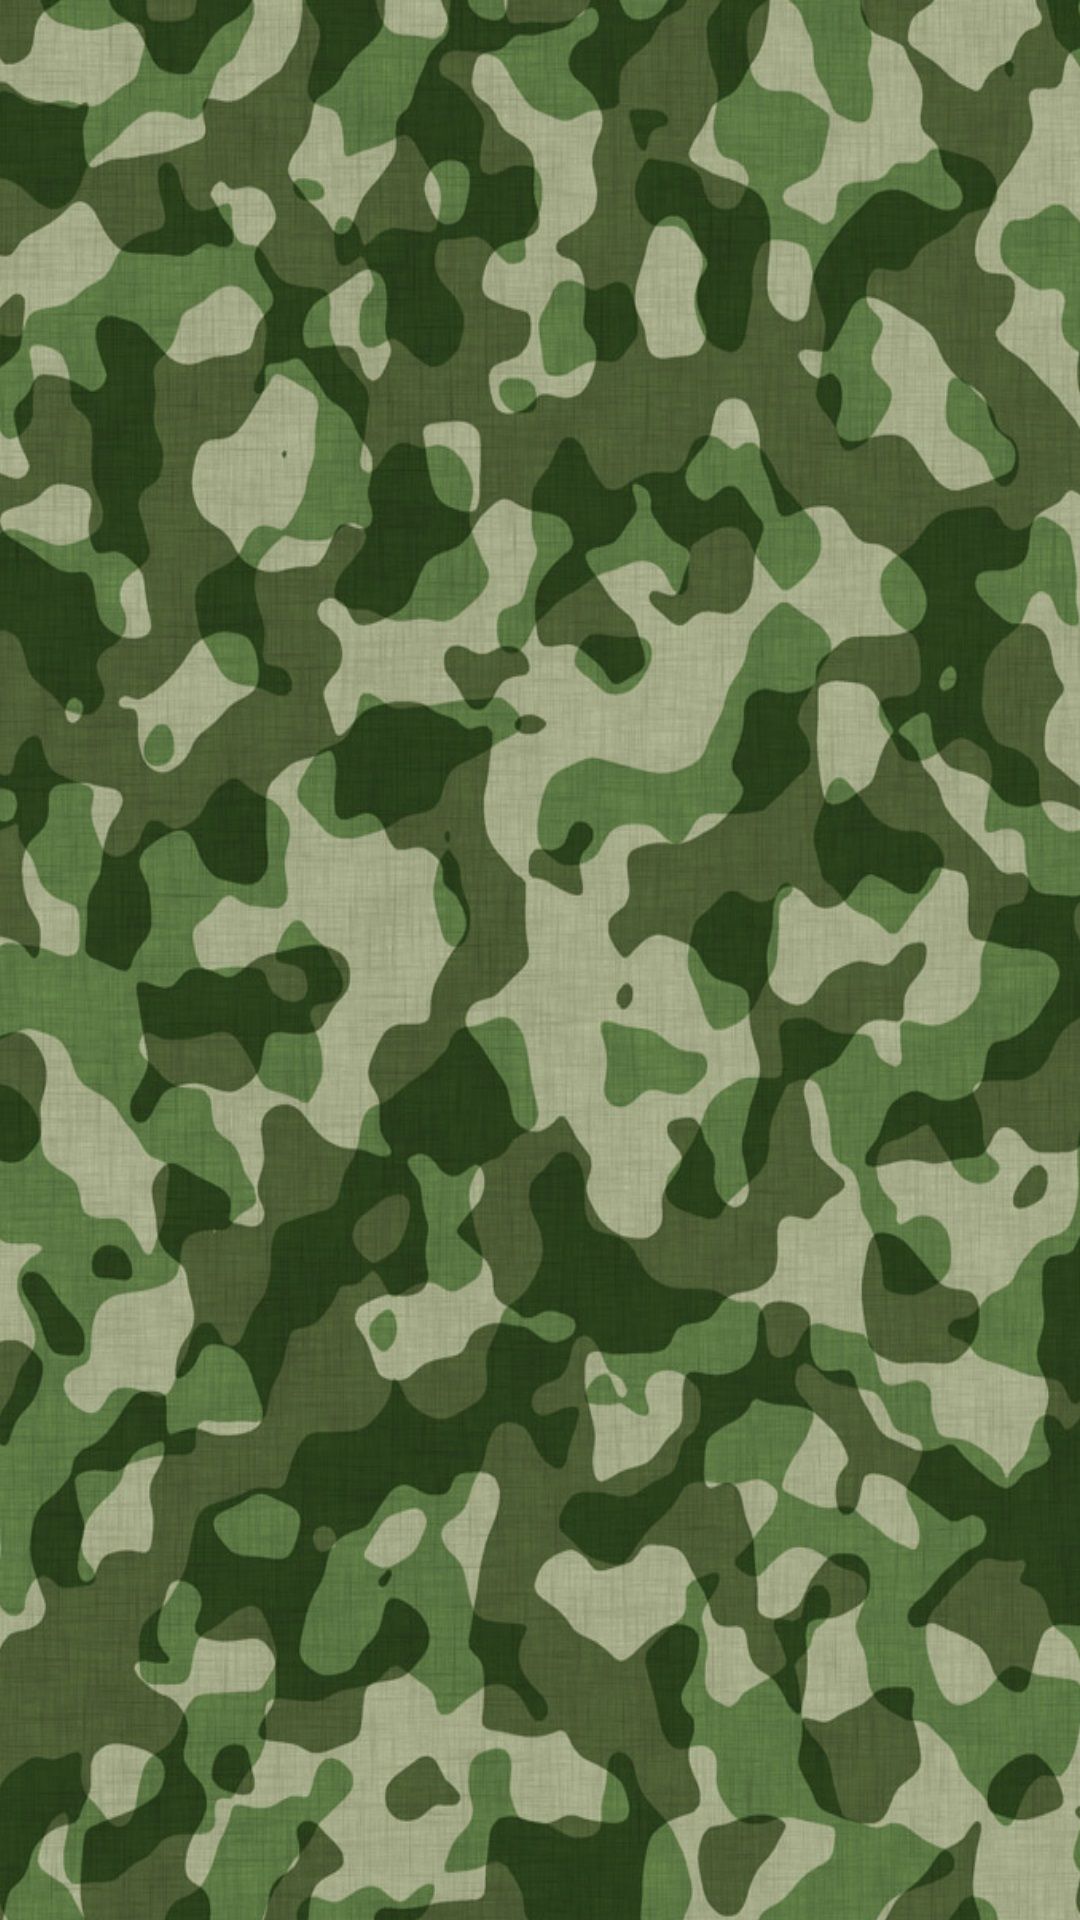 Camouflage wallpaper for iPhone or Android. Tags: camo, hunting